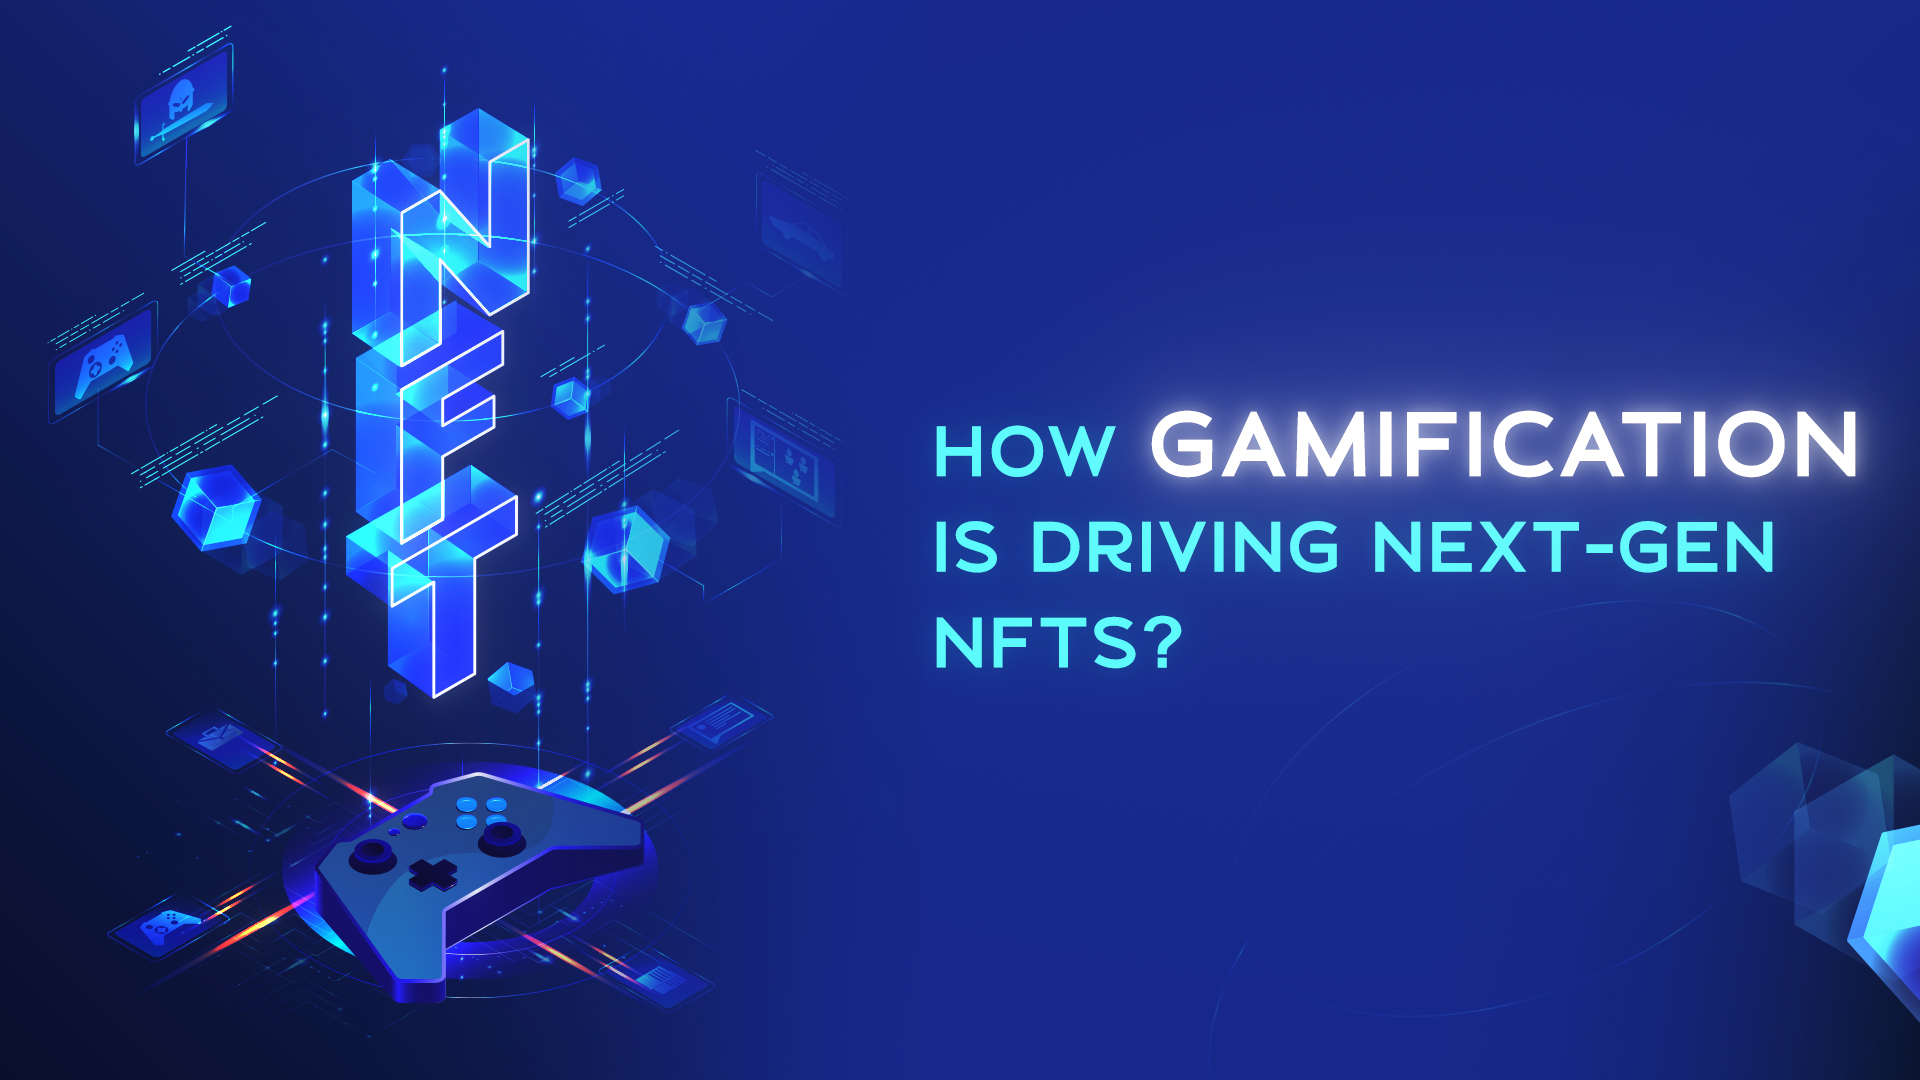 How Gamification Is Driving Next-Gen NFTs?